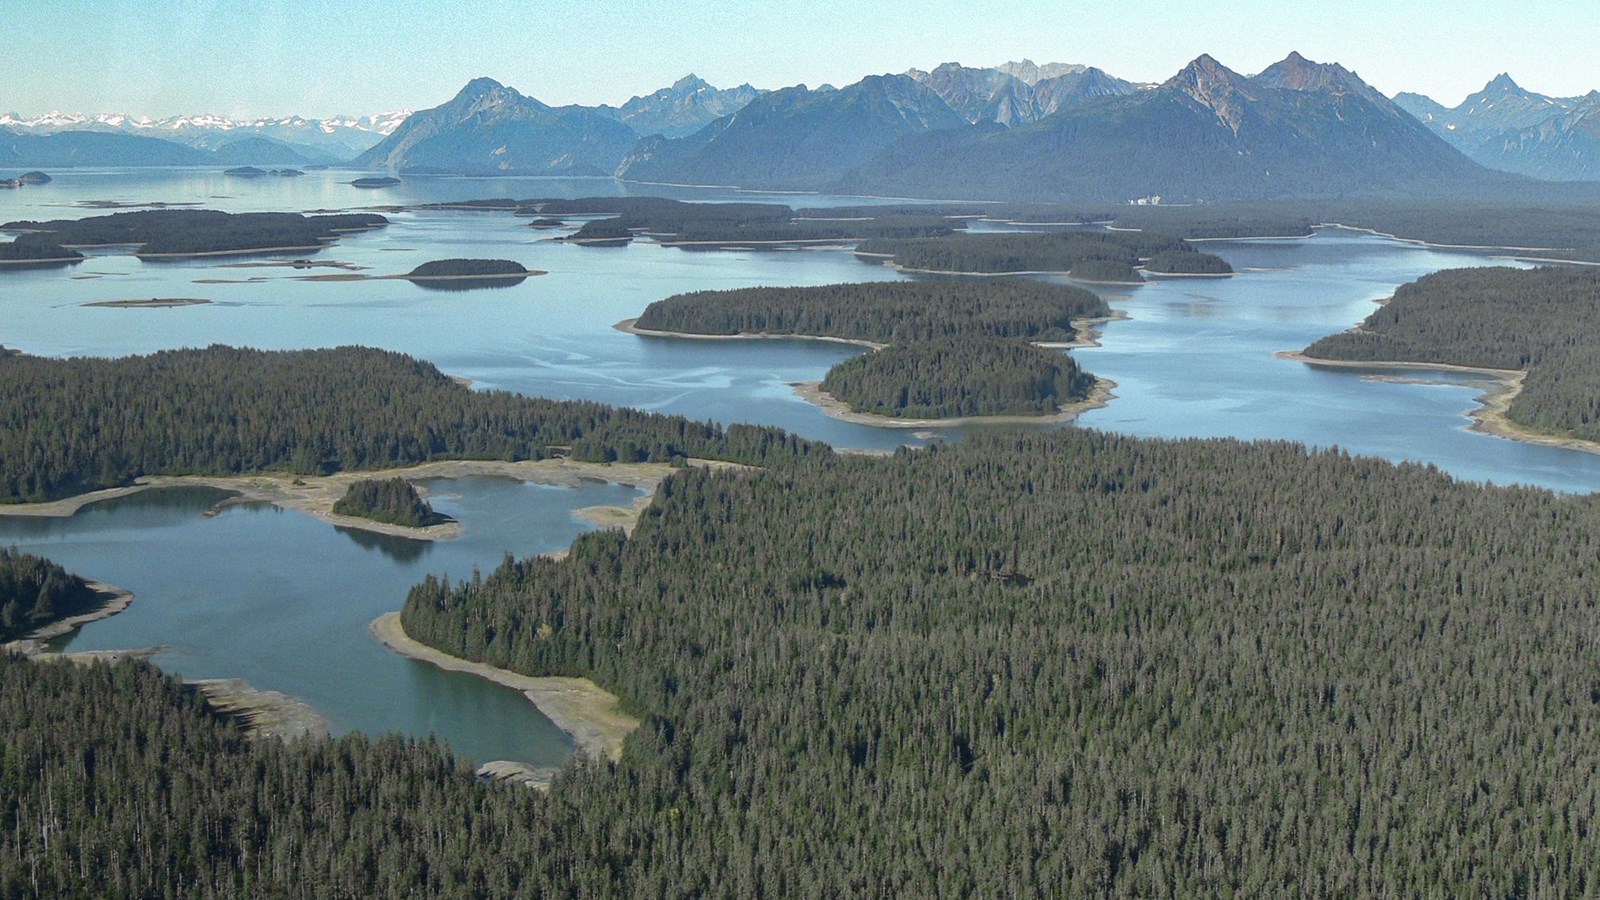 Aerial view of the beardslee islands. Many forested flat islands lie before distant tall mountains.